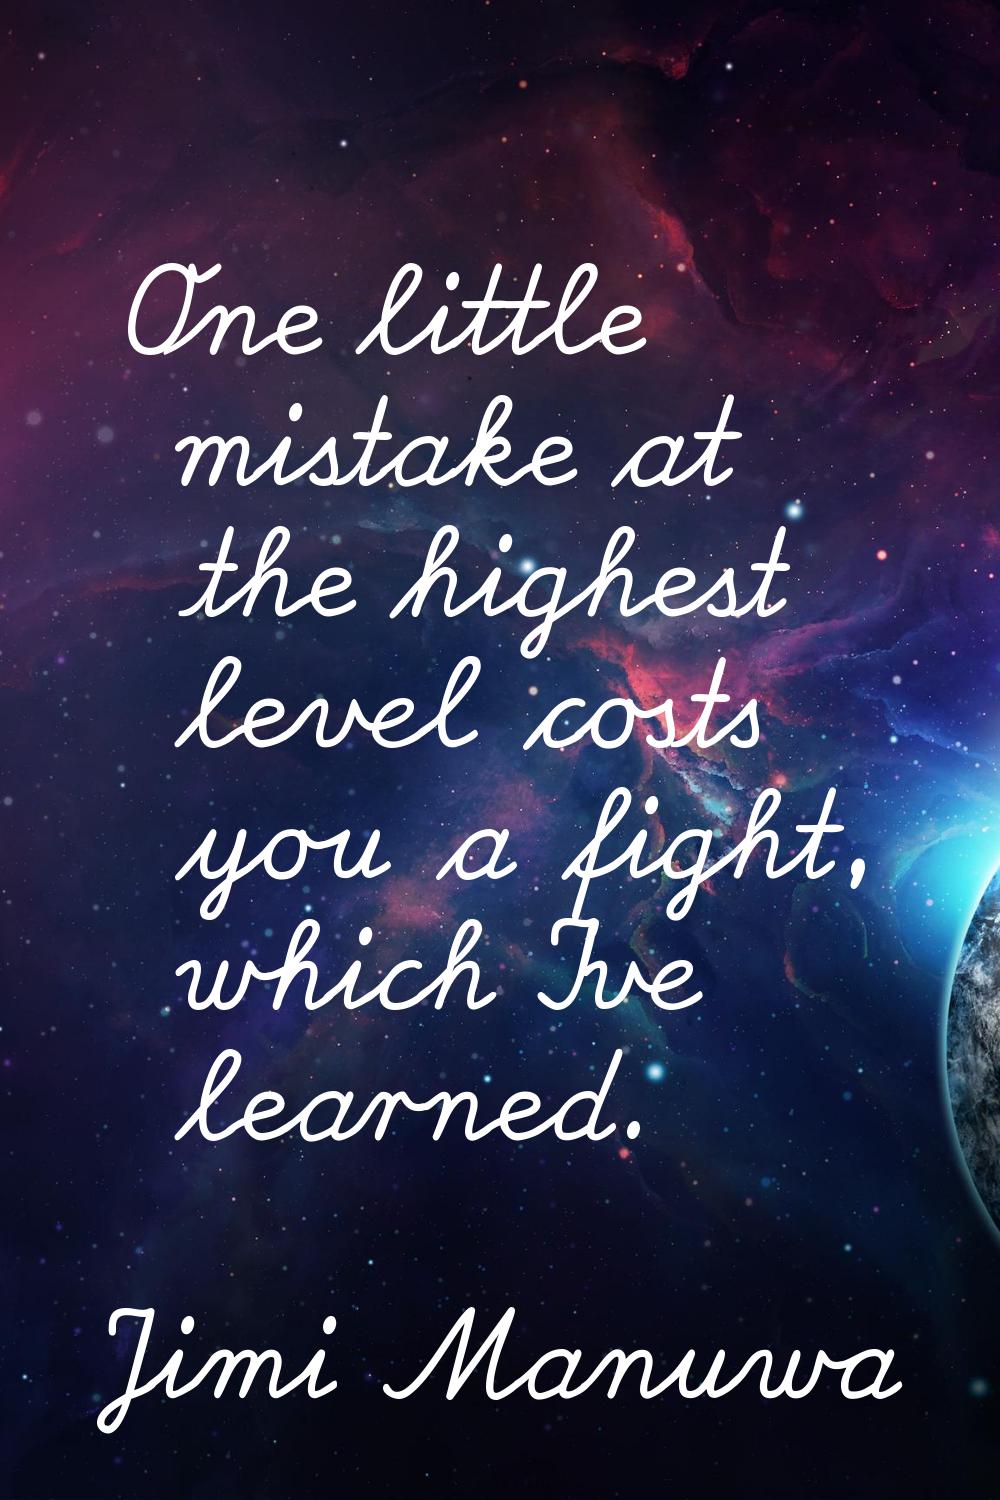 One little mistake at the highest level costs you a fight, which I've learned.